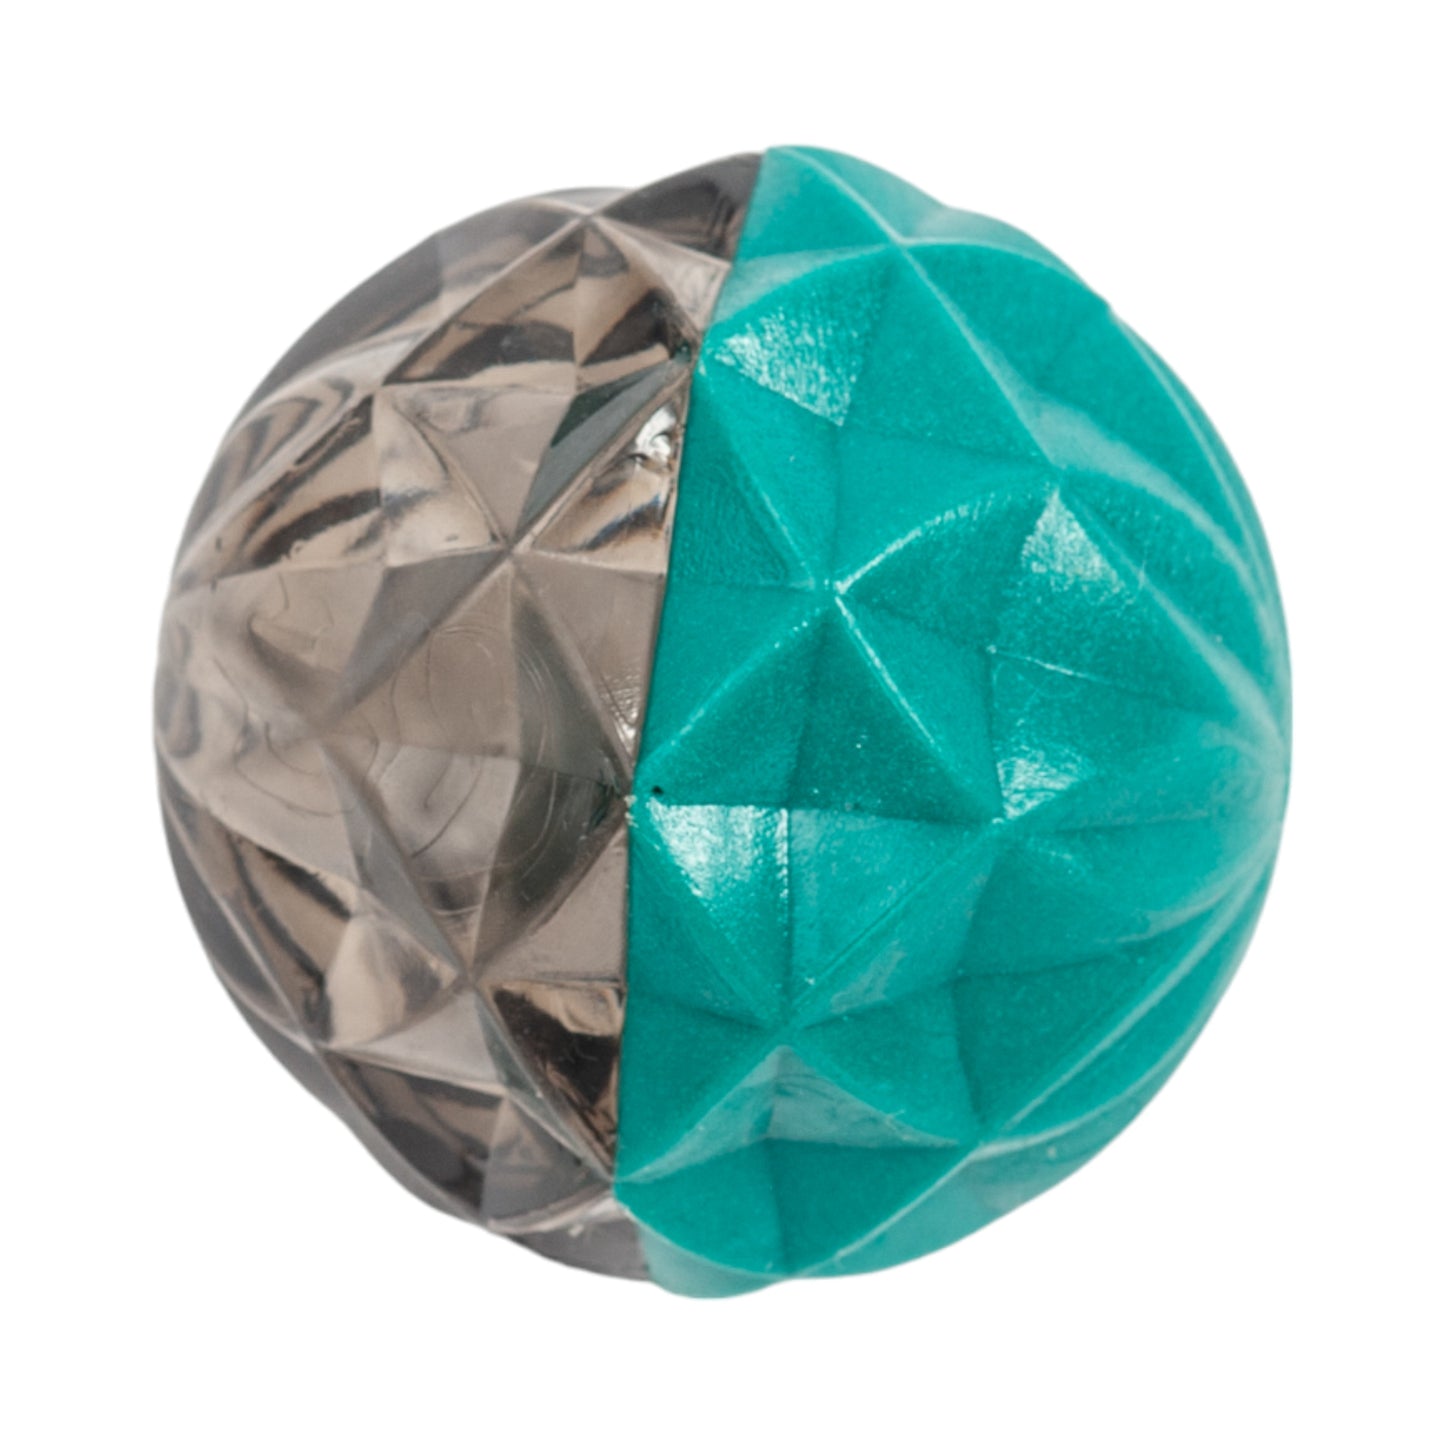 Country Living Geometric Design Textured Ball Dog Chew Toy - Small